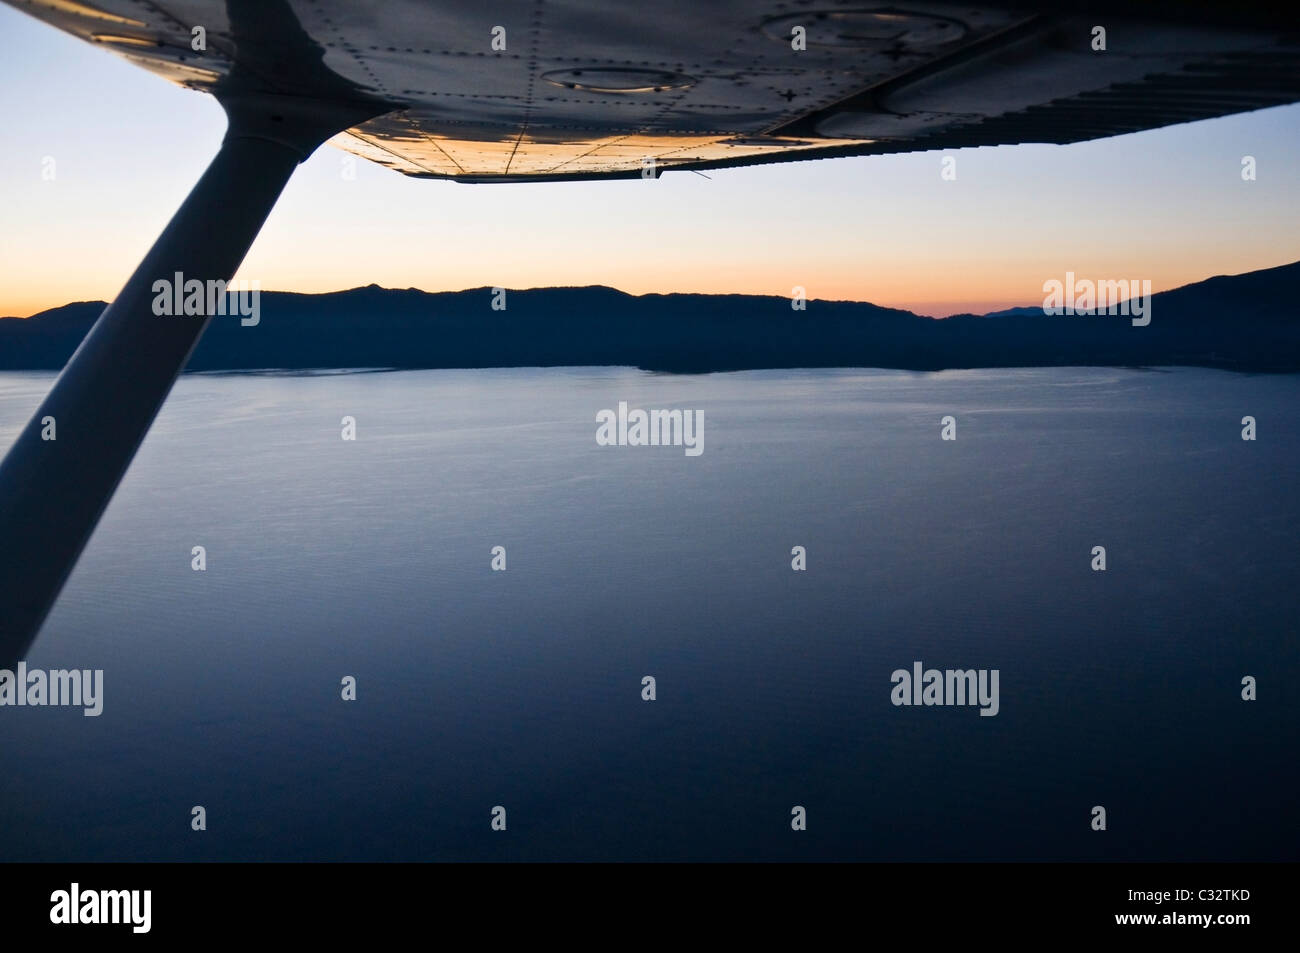 The wing of a small airplane reflects an aerial view of a sunrise over Lake Tahoe, CA. Stock Photo